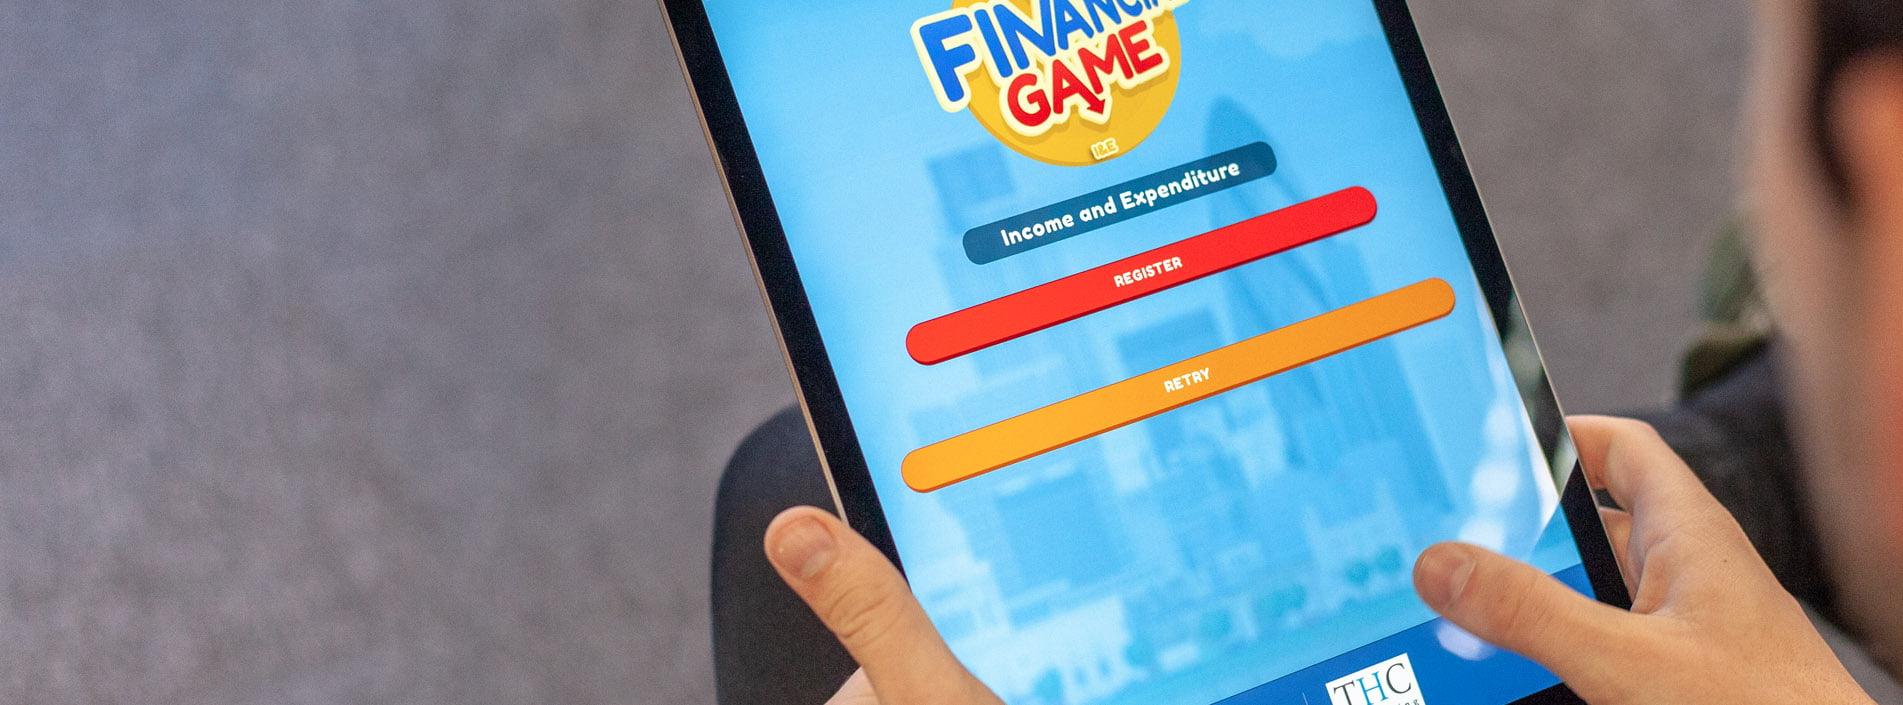 ipad showing financial game mobile app development